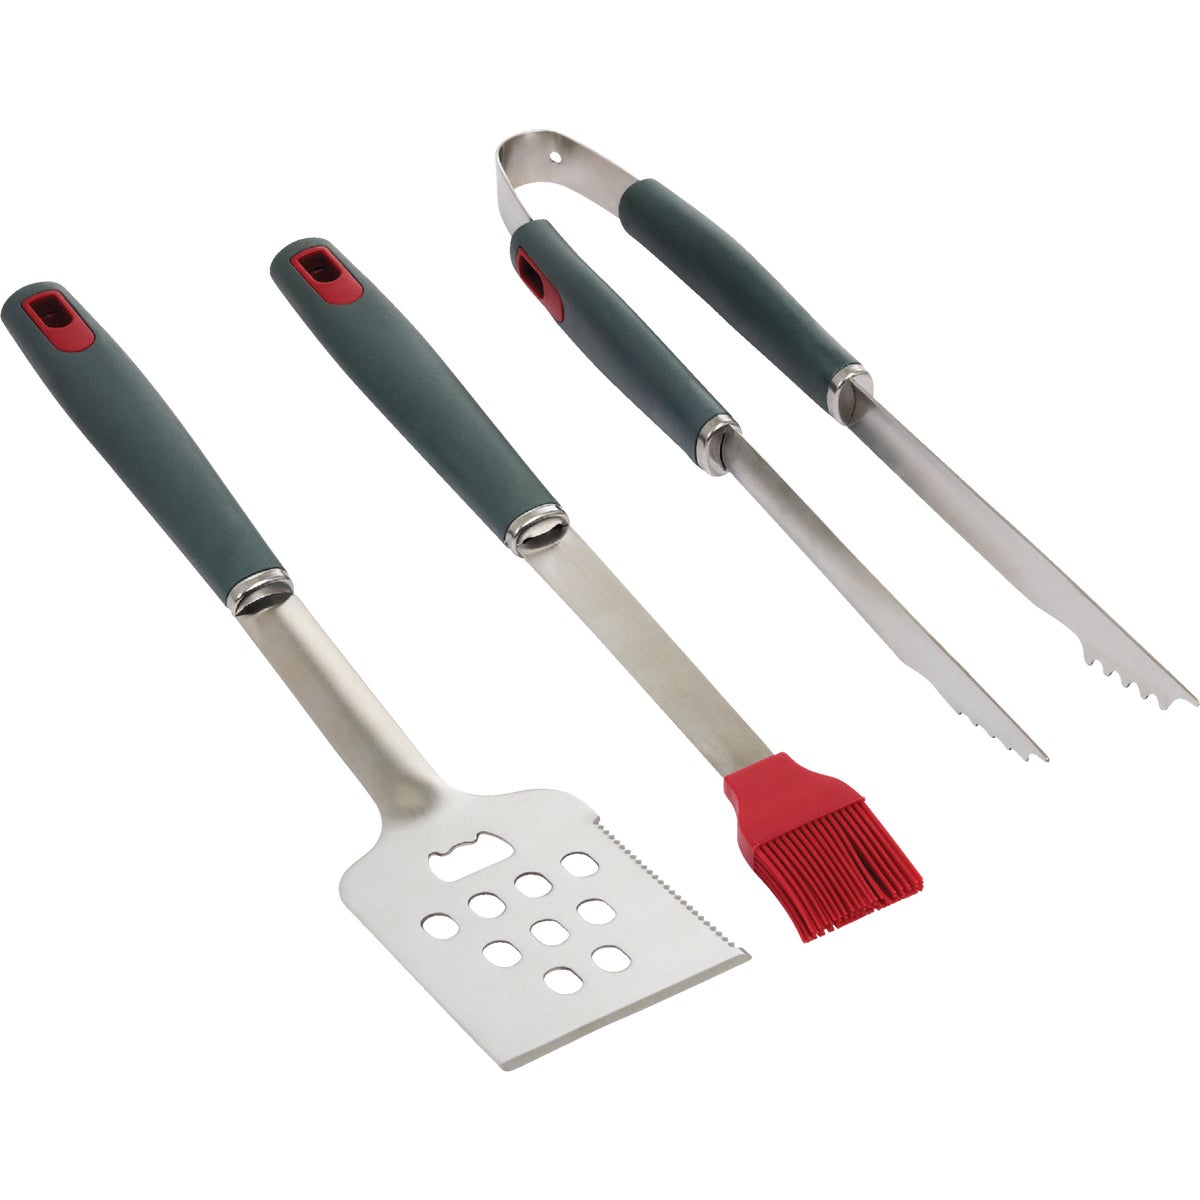 Item 800087, 3-piece stainless steel set includes turner, tong, and silicone tip basting